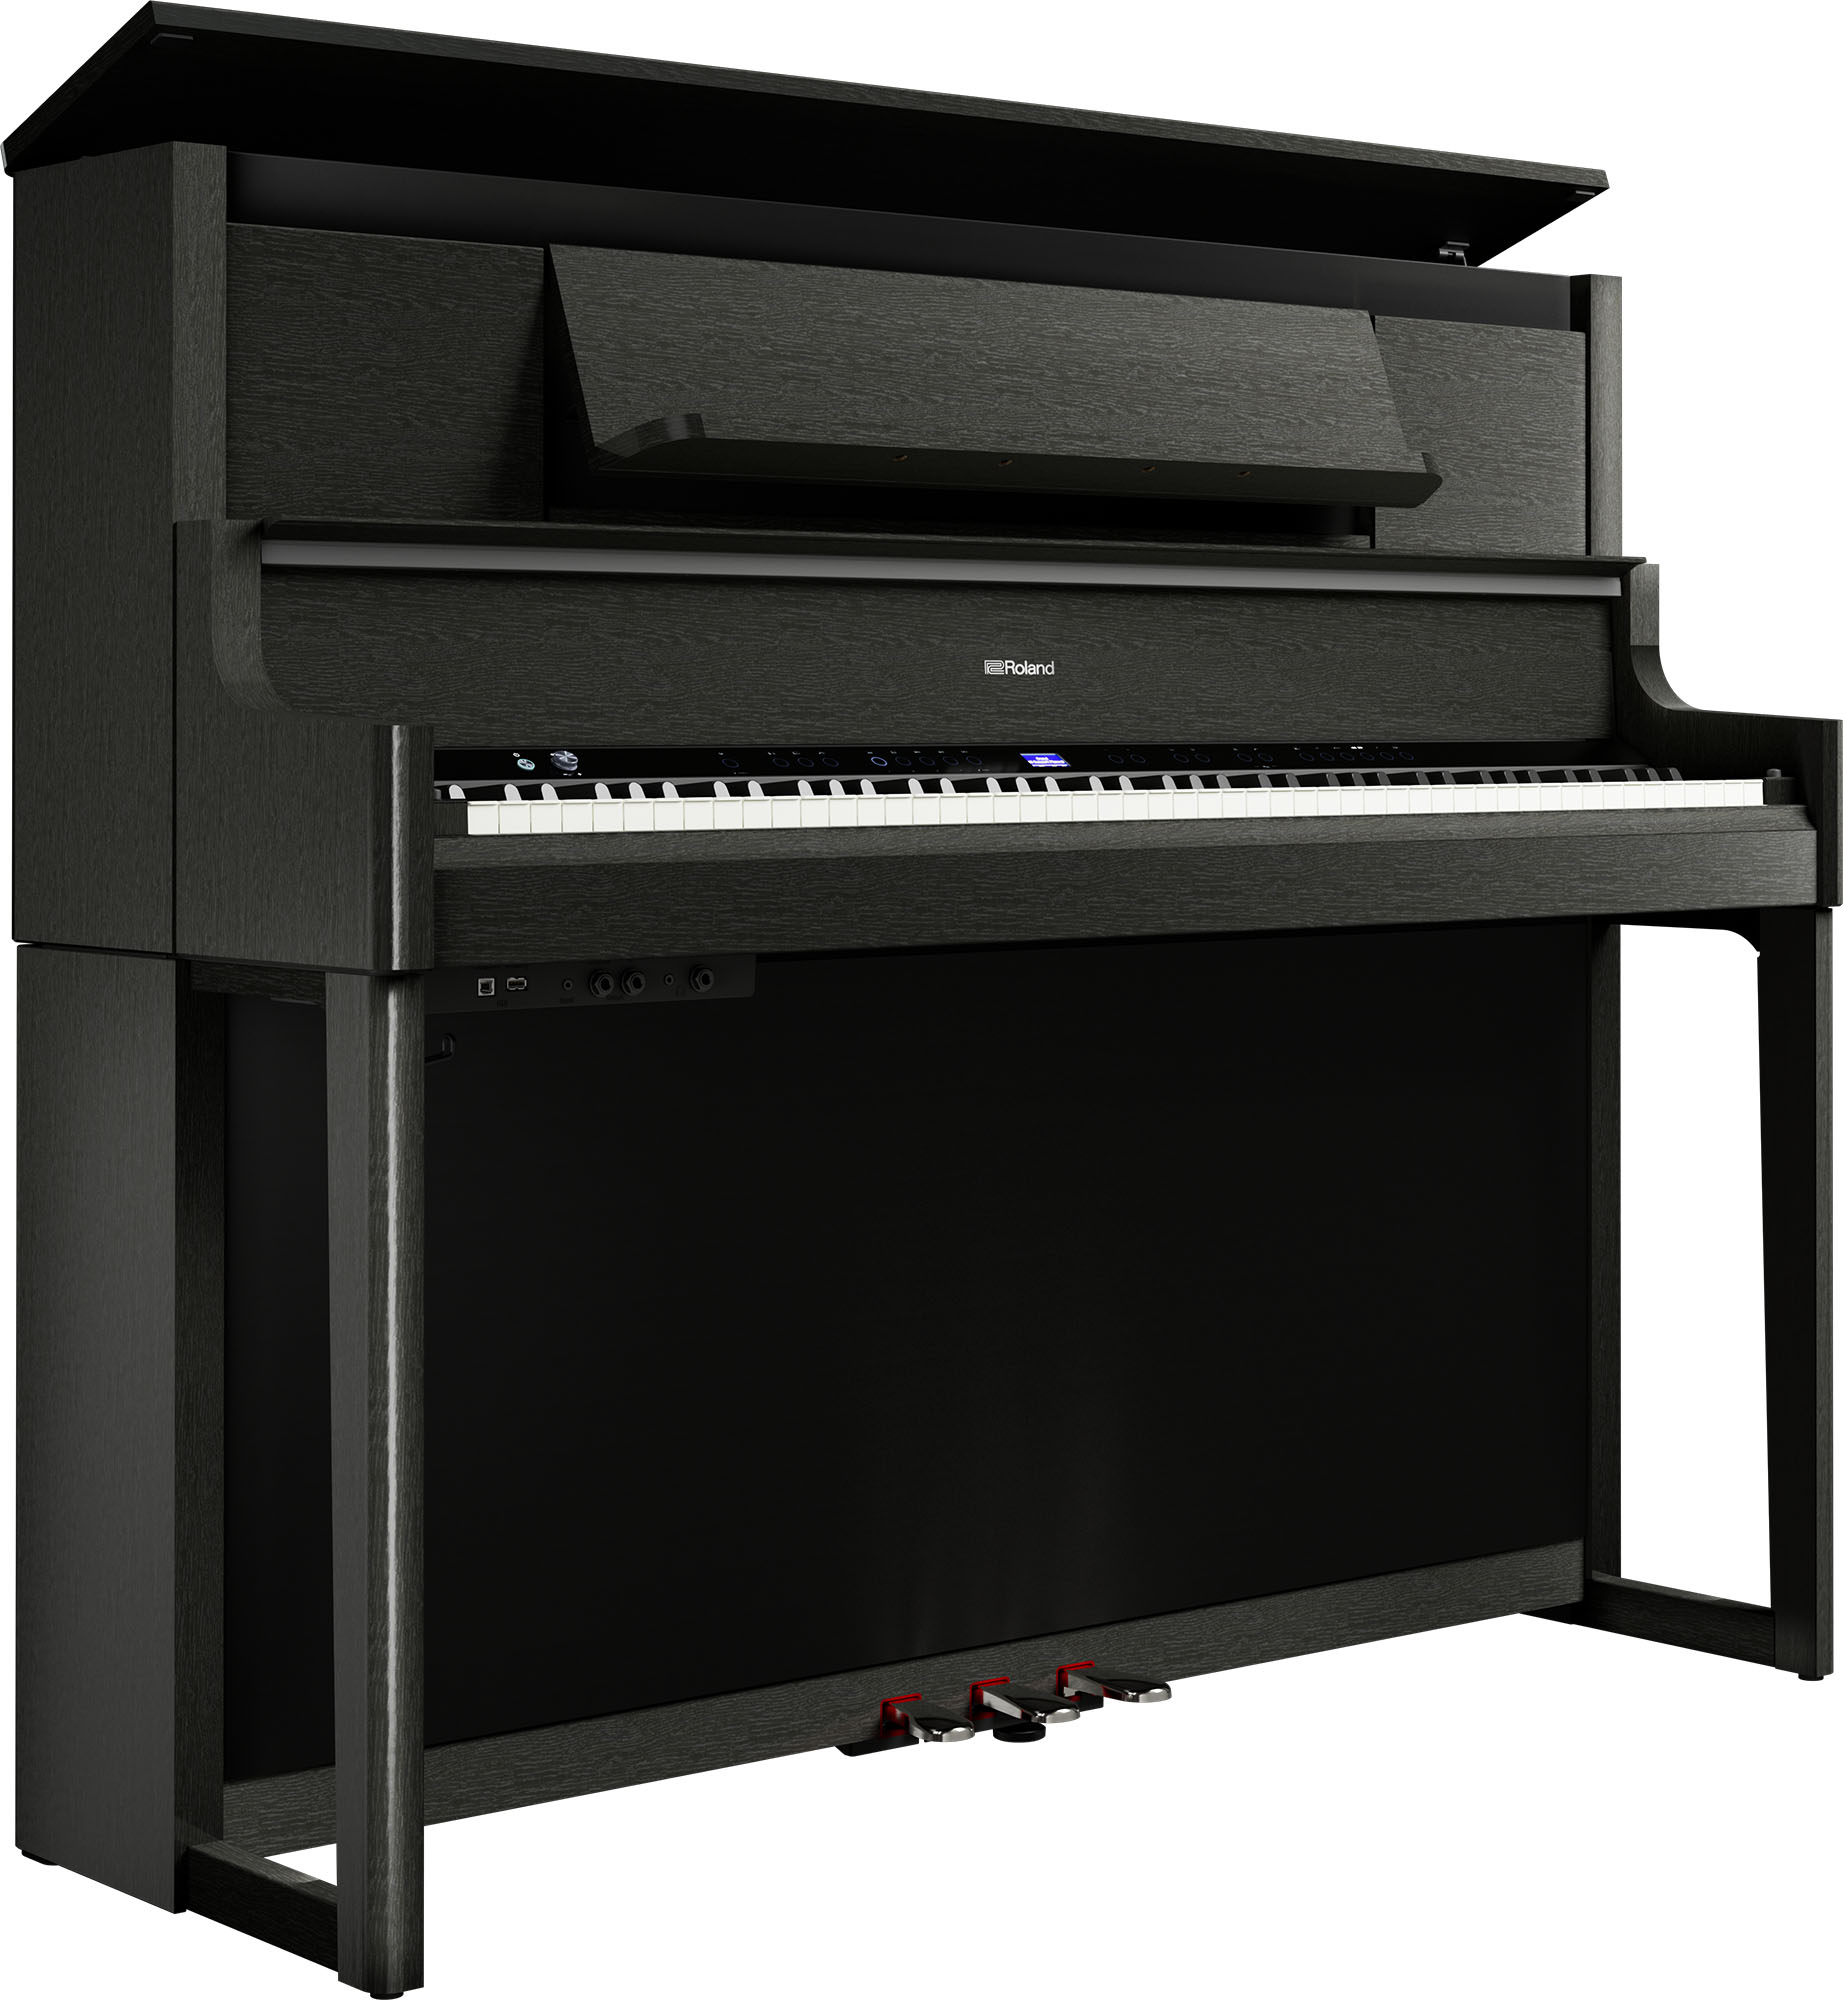 Roland Lx-9-ch - Charcoal Black - Piano digital con mueble - Variation 2